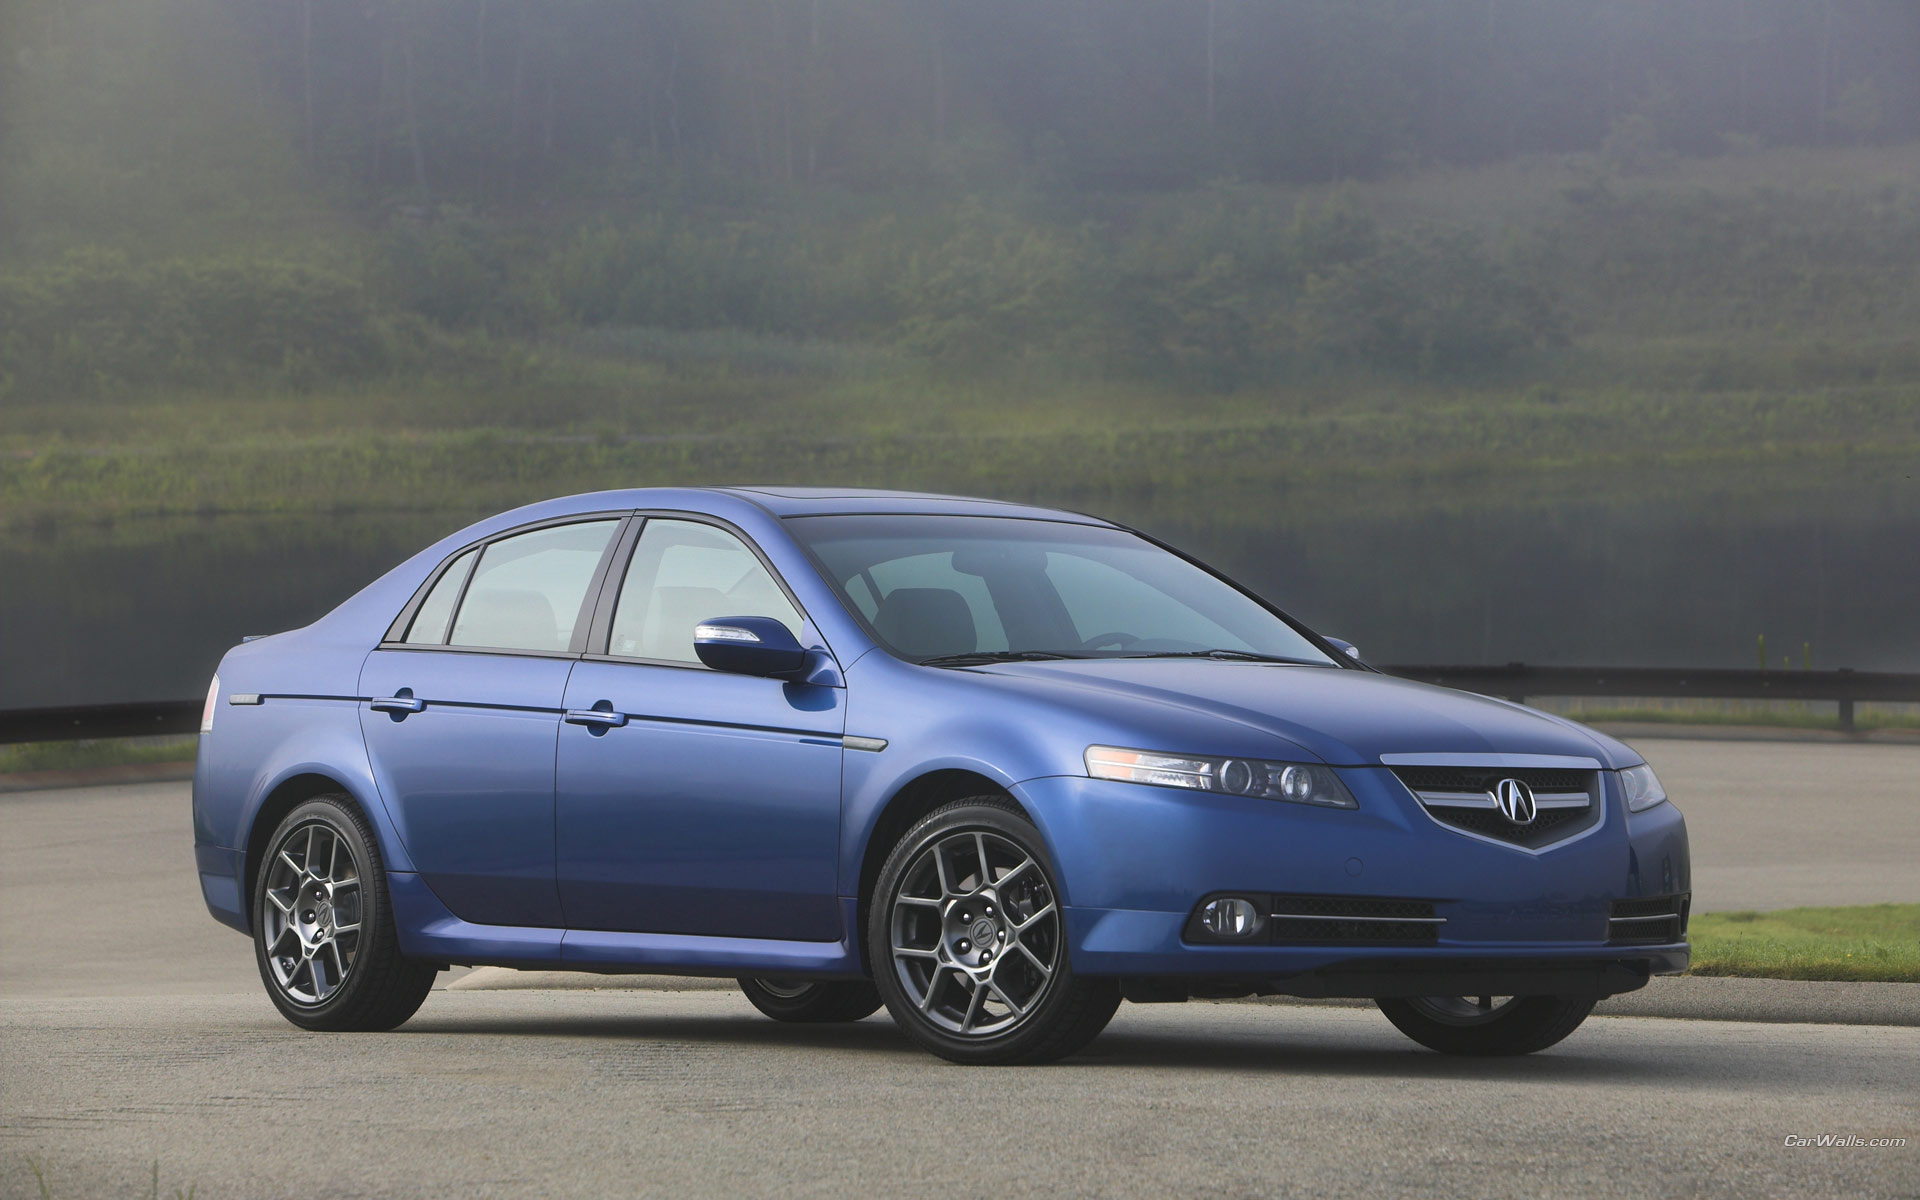 Download HQ Acura TL type S blue side Acura wallpaper / 1920x1200